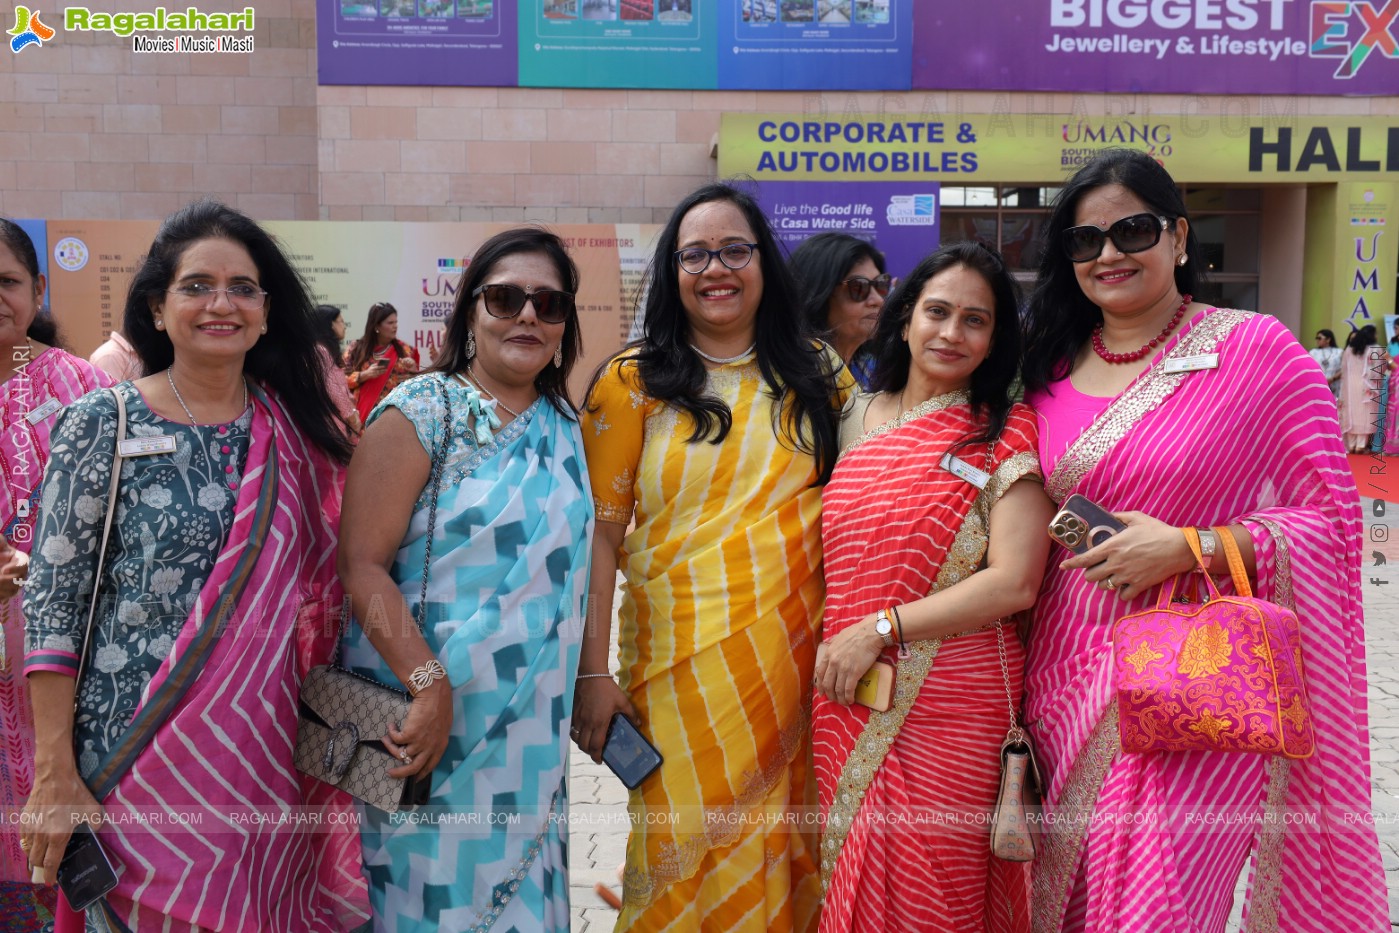 Umang 2.0: South India's biggest Jewellery and Lifestyle Exhibition at Hitex